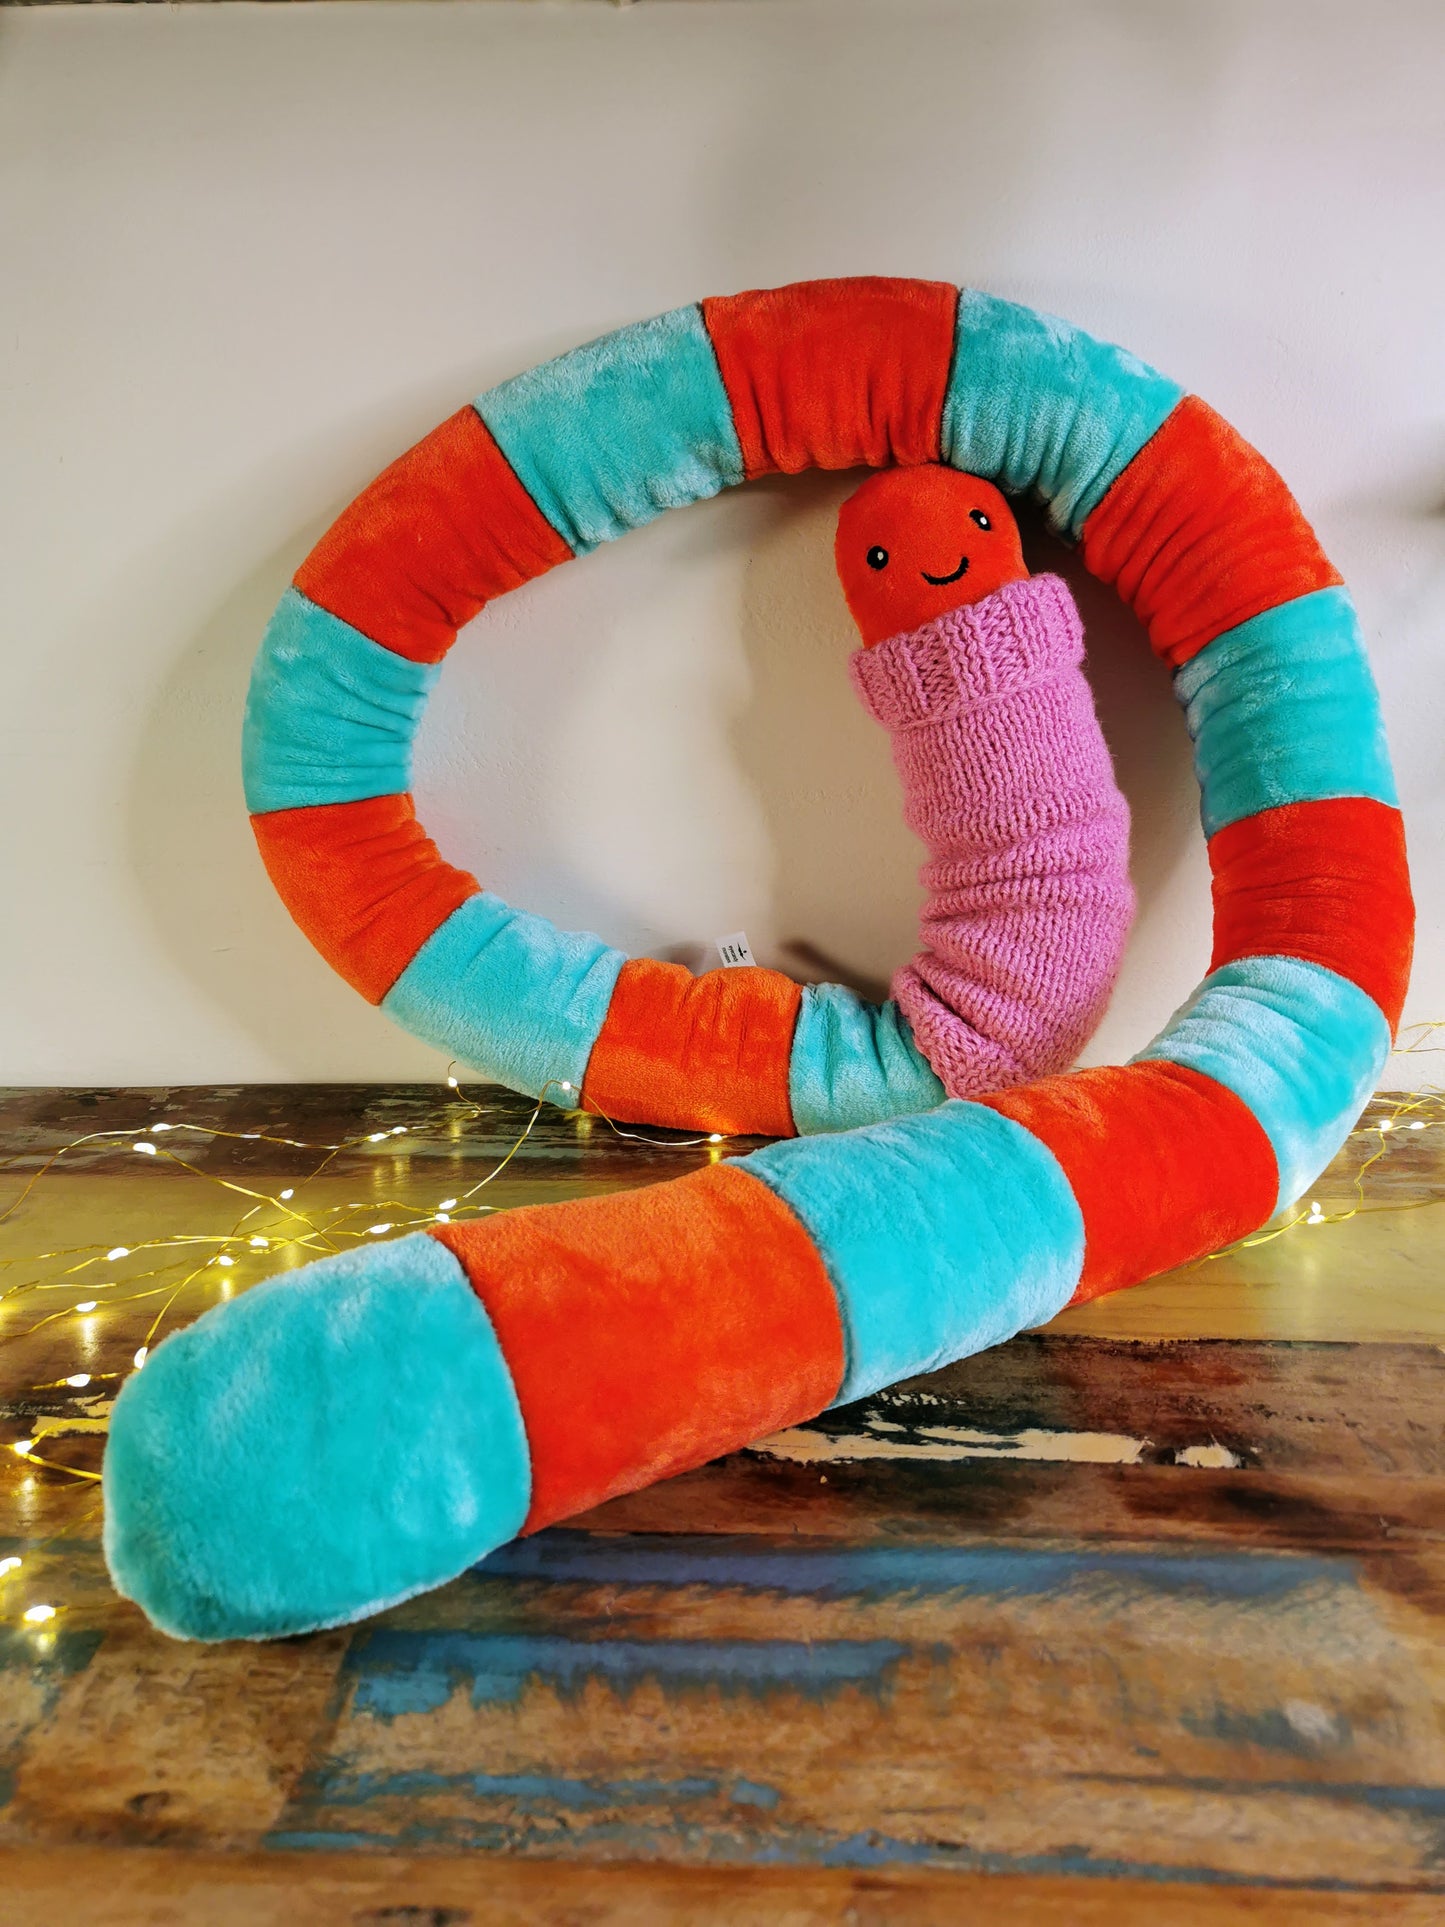 Giant Worm Plush with knitted turtleneck, funny odd creature, Mandarine/Teal Plush, 200cm